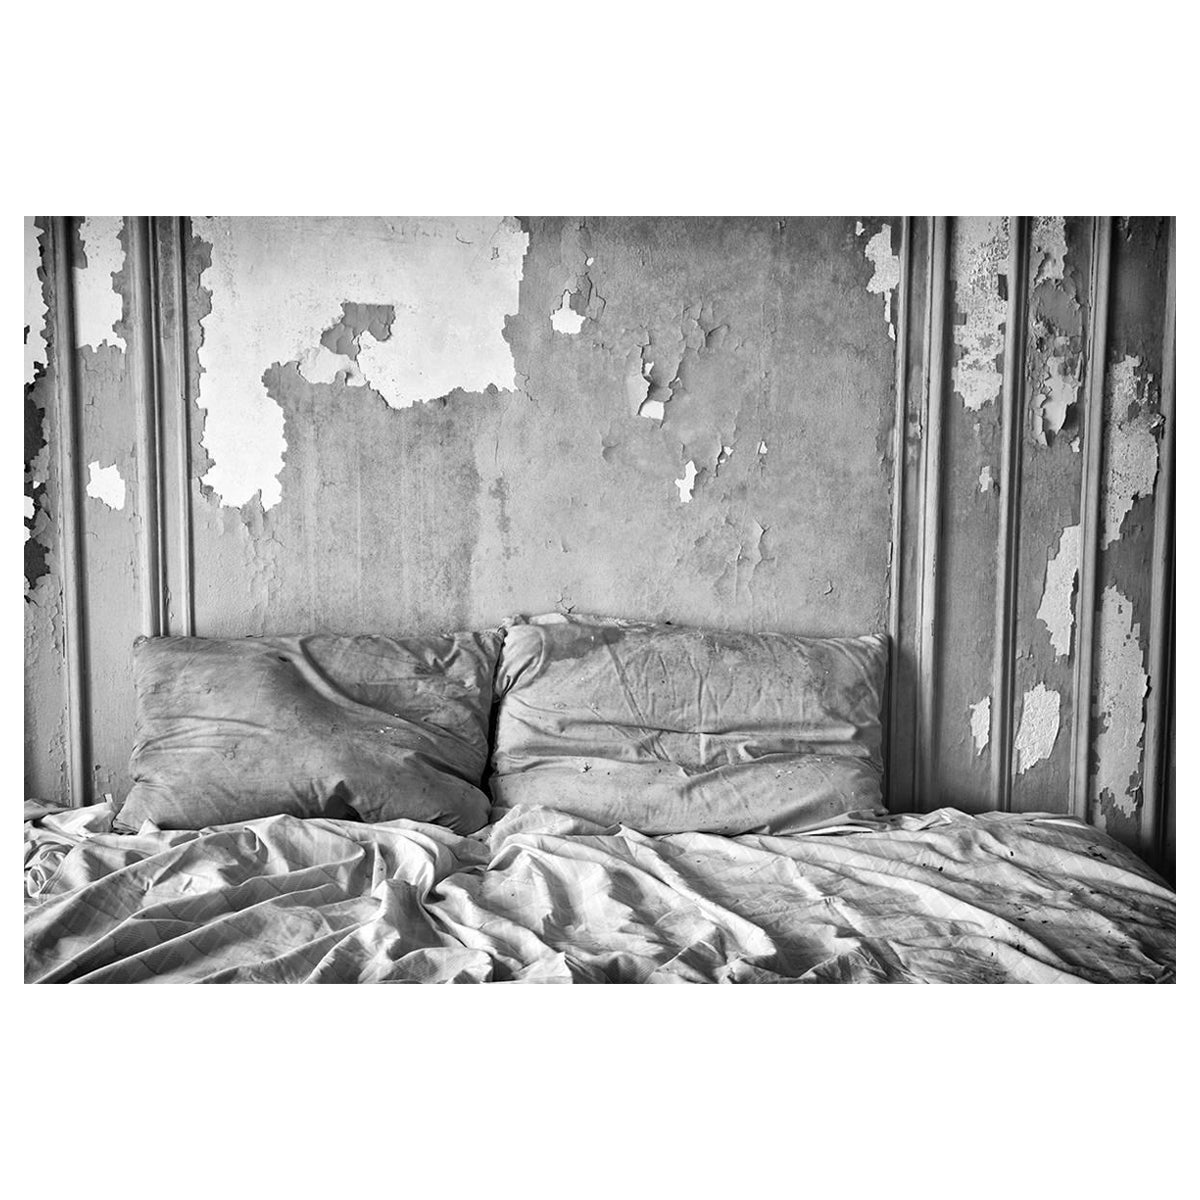 Rebecca Skinner Black and White Photograph - "Over", abandoned, bed, pillows, metal print, black and white, photograph